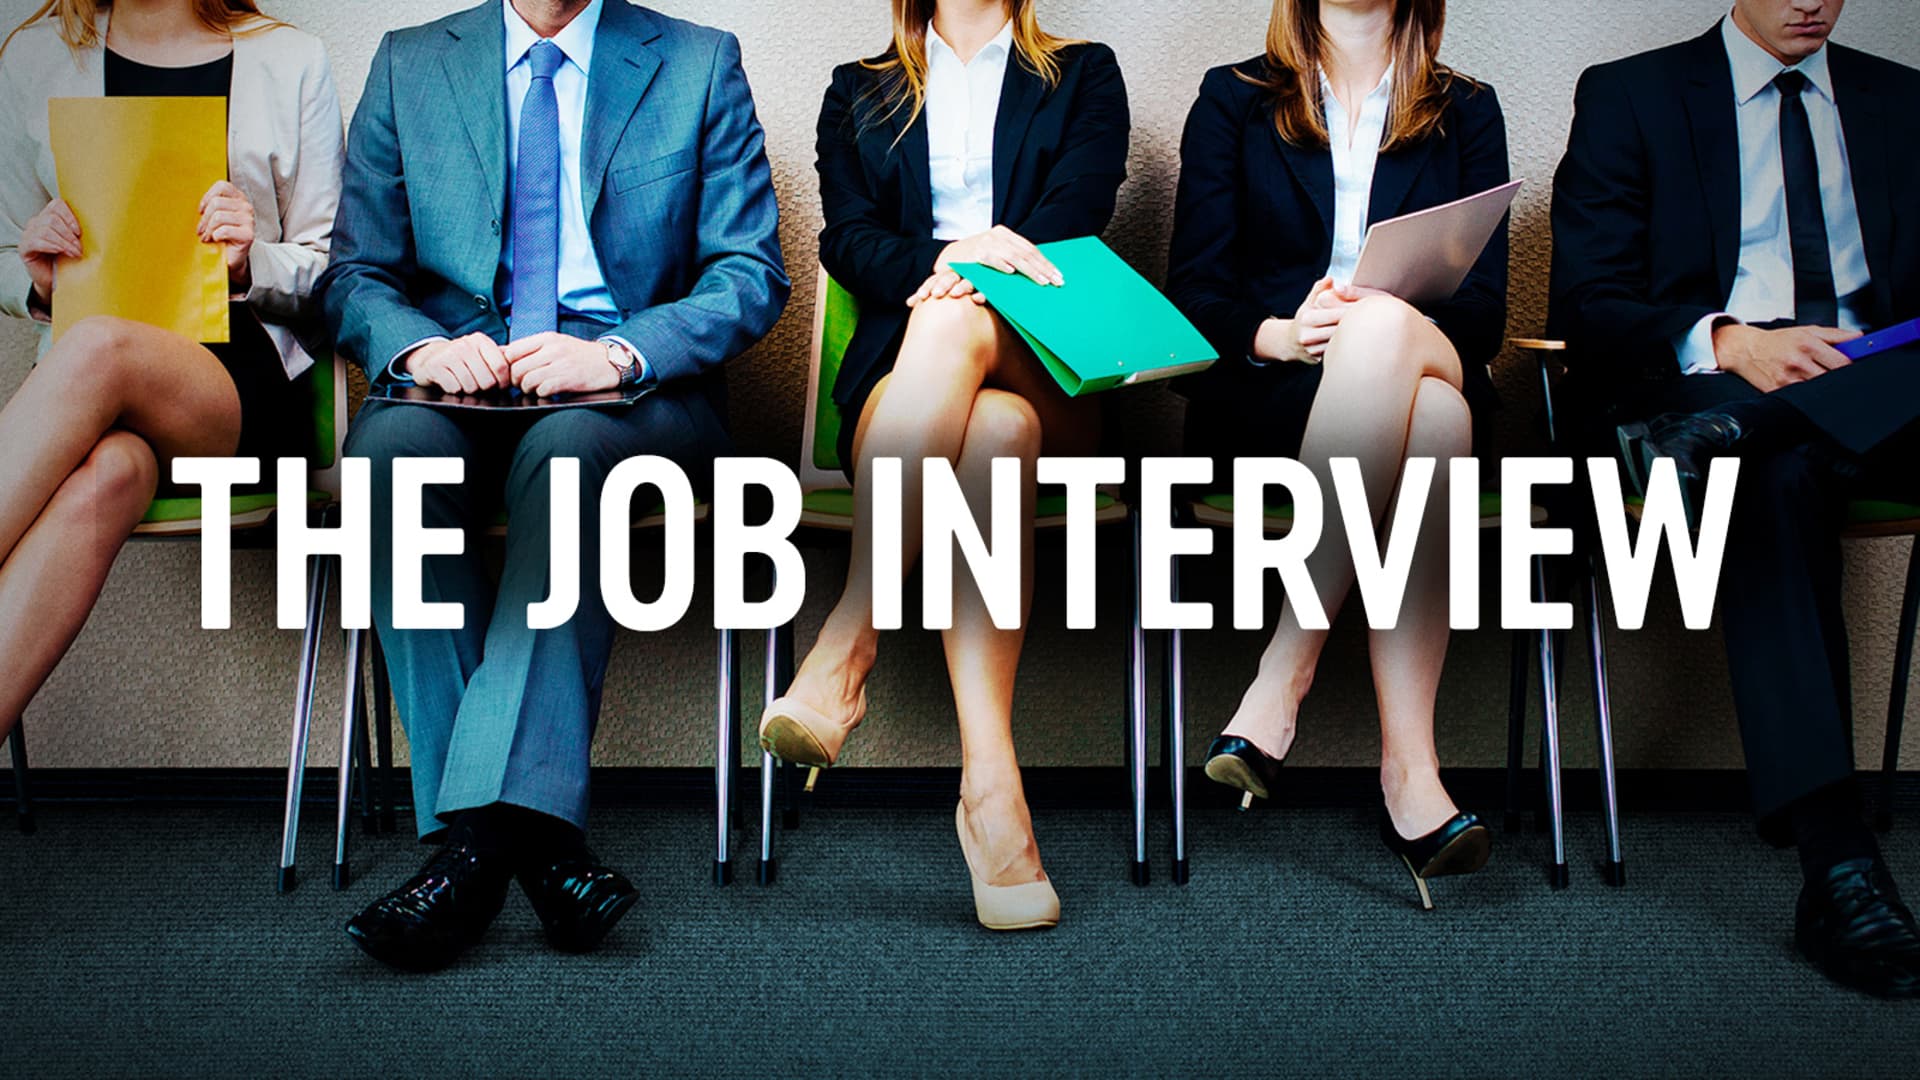 Why Are We Not Invited To Job Interviews?